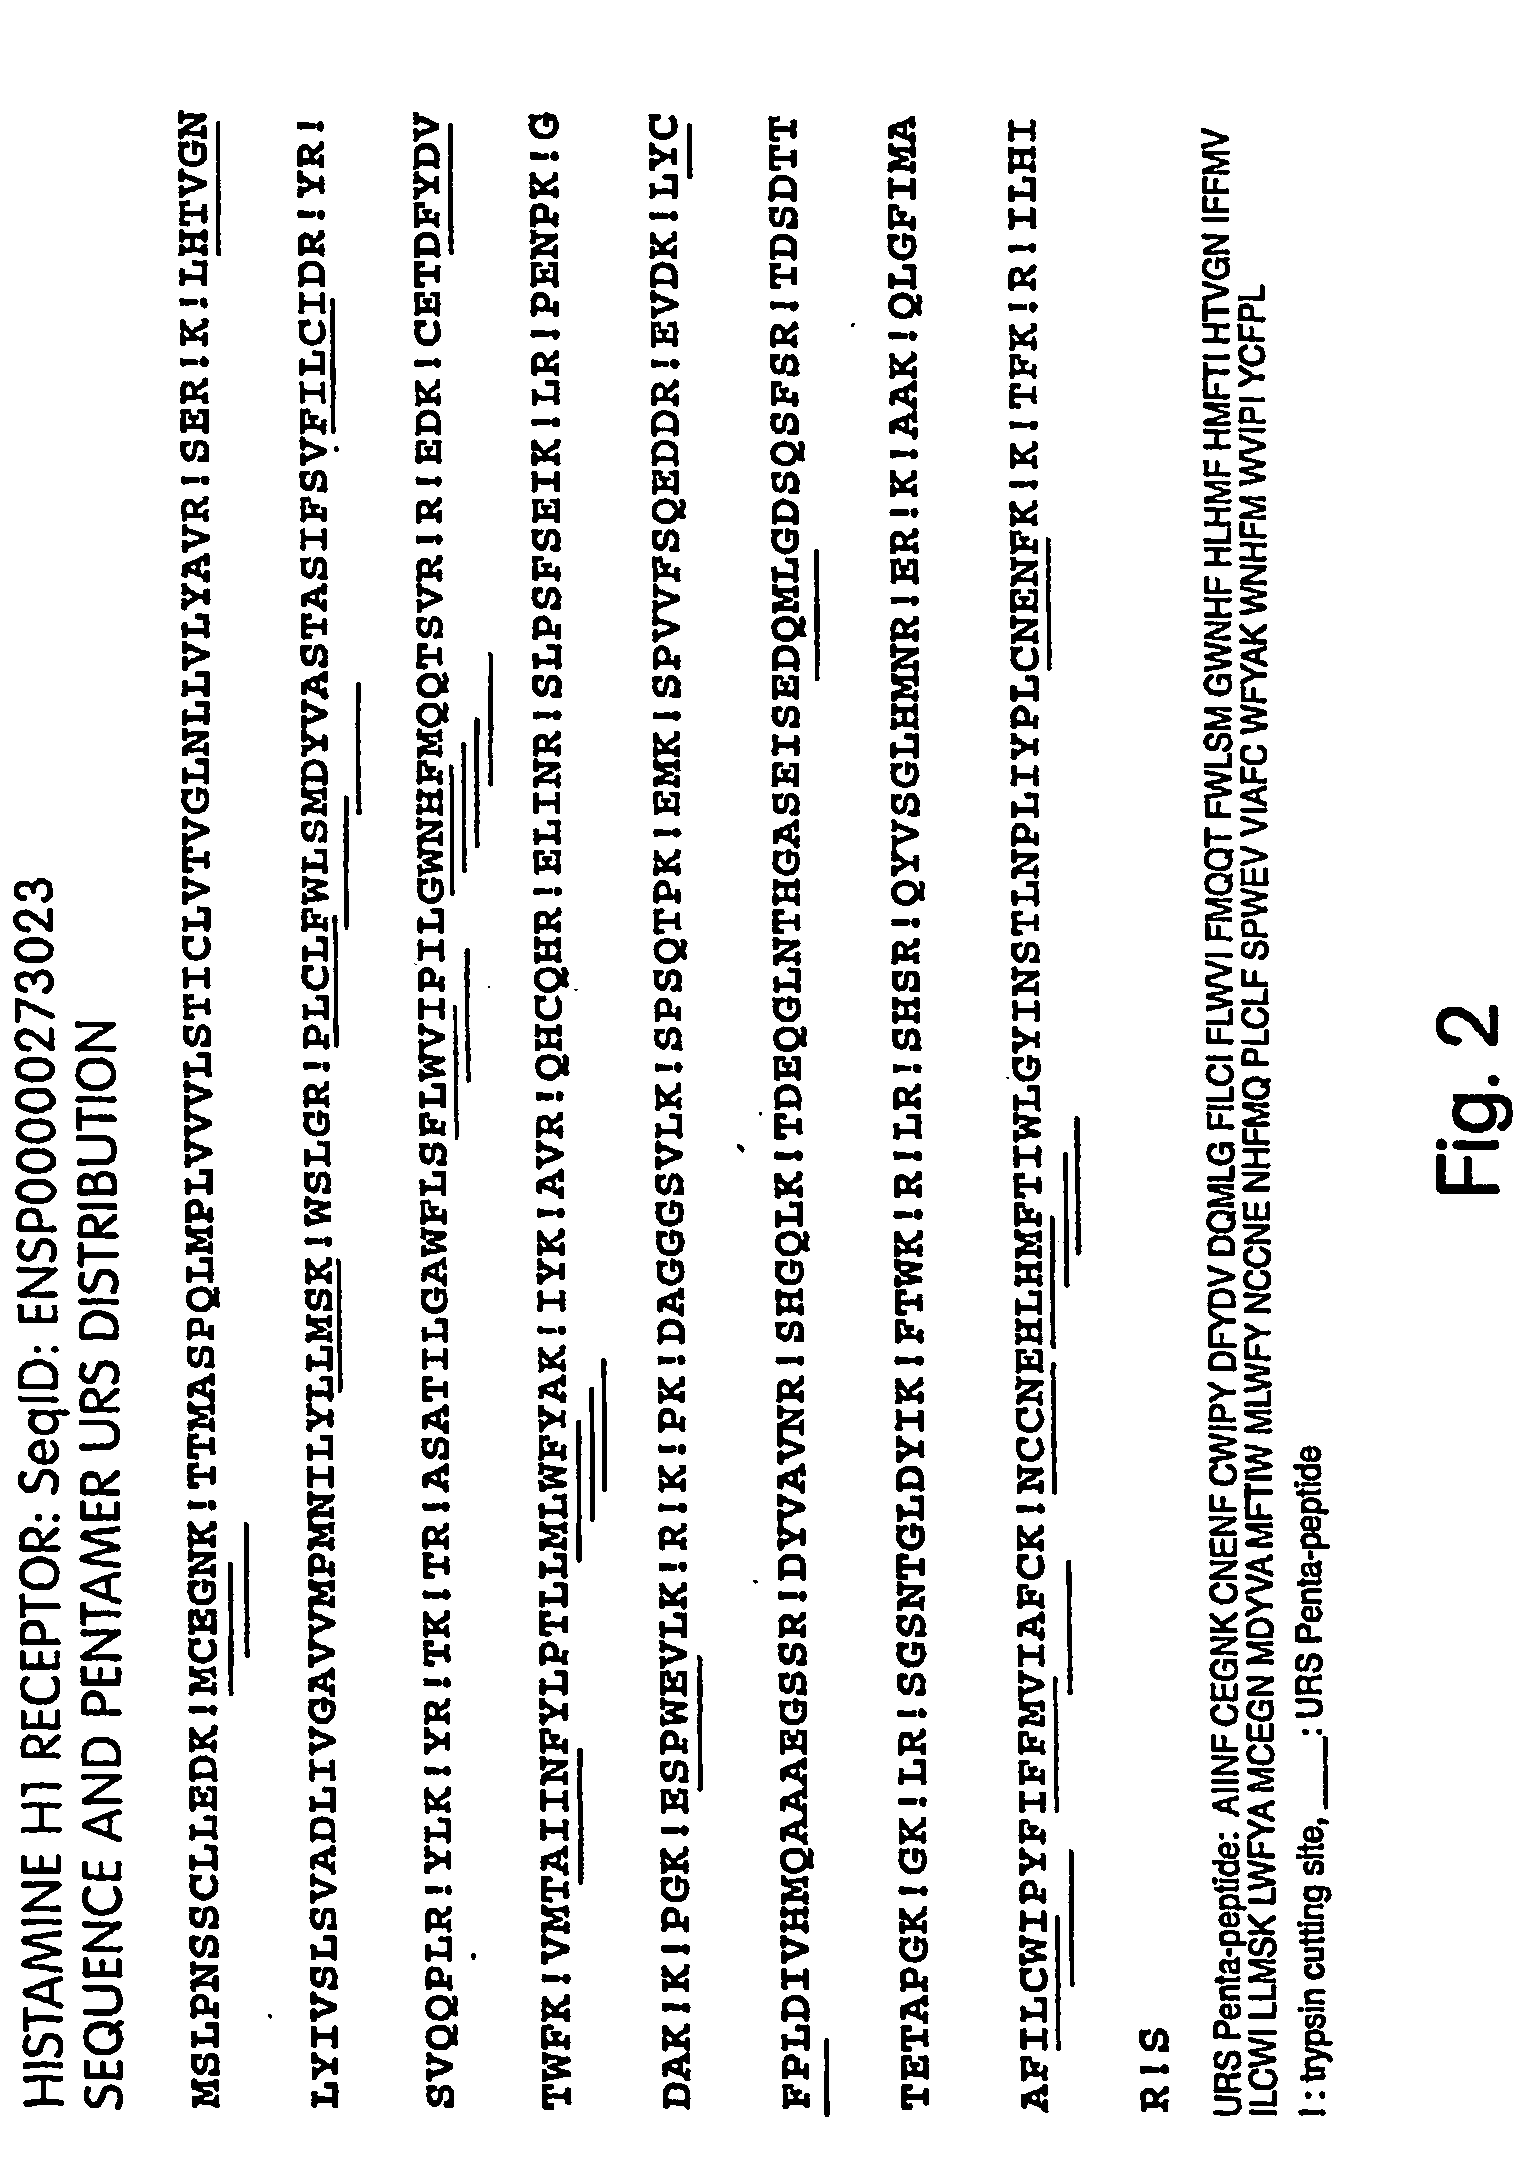 Unique recognition sequences and methods of use thereof in protein analysis